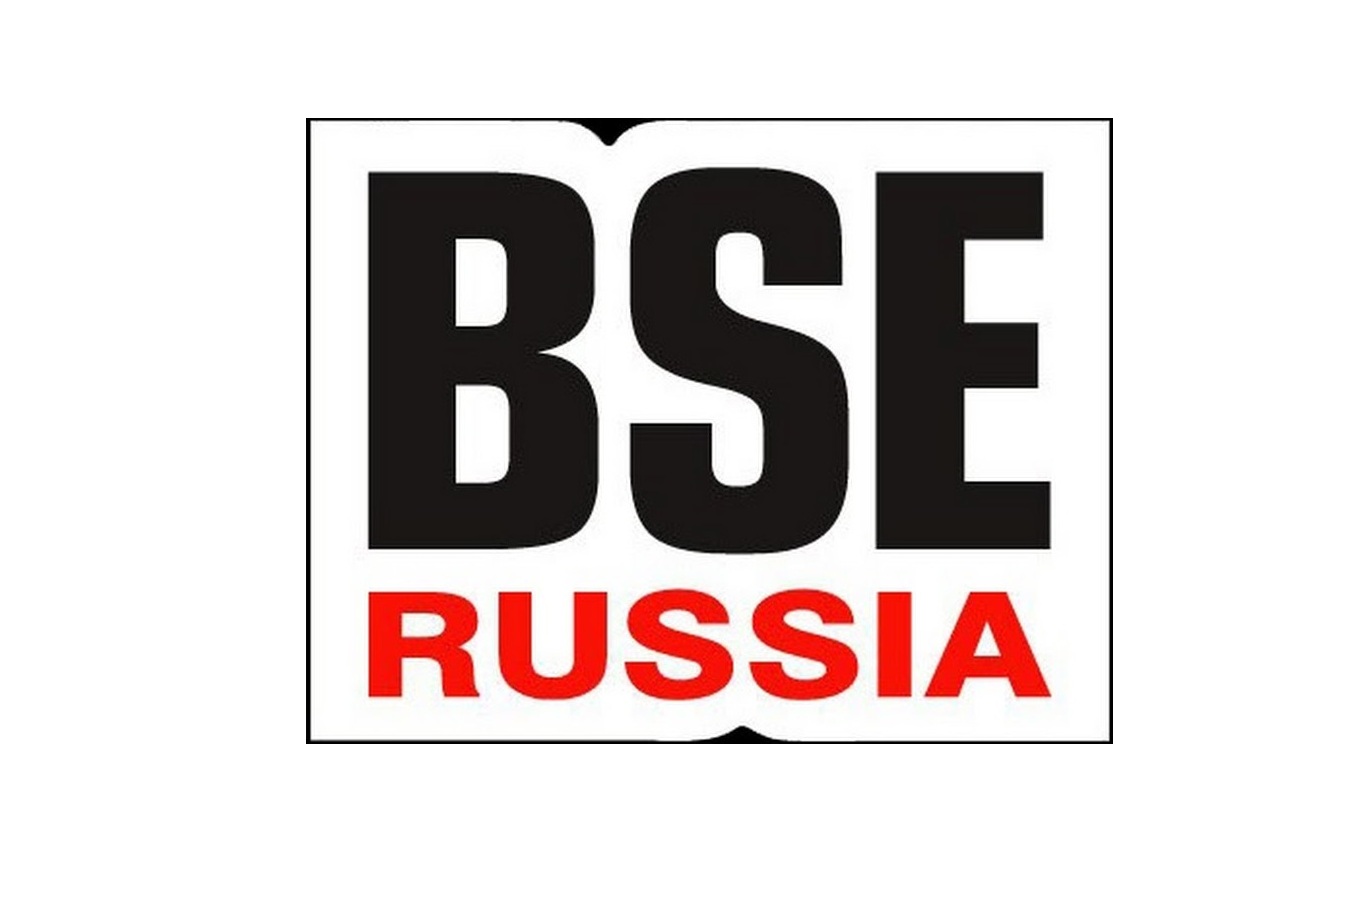 BSE Russia